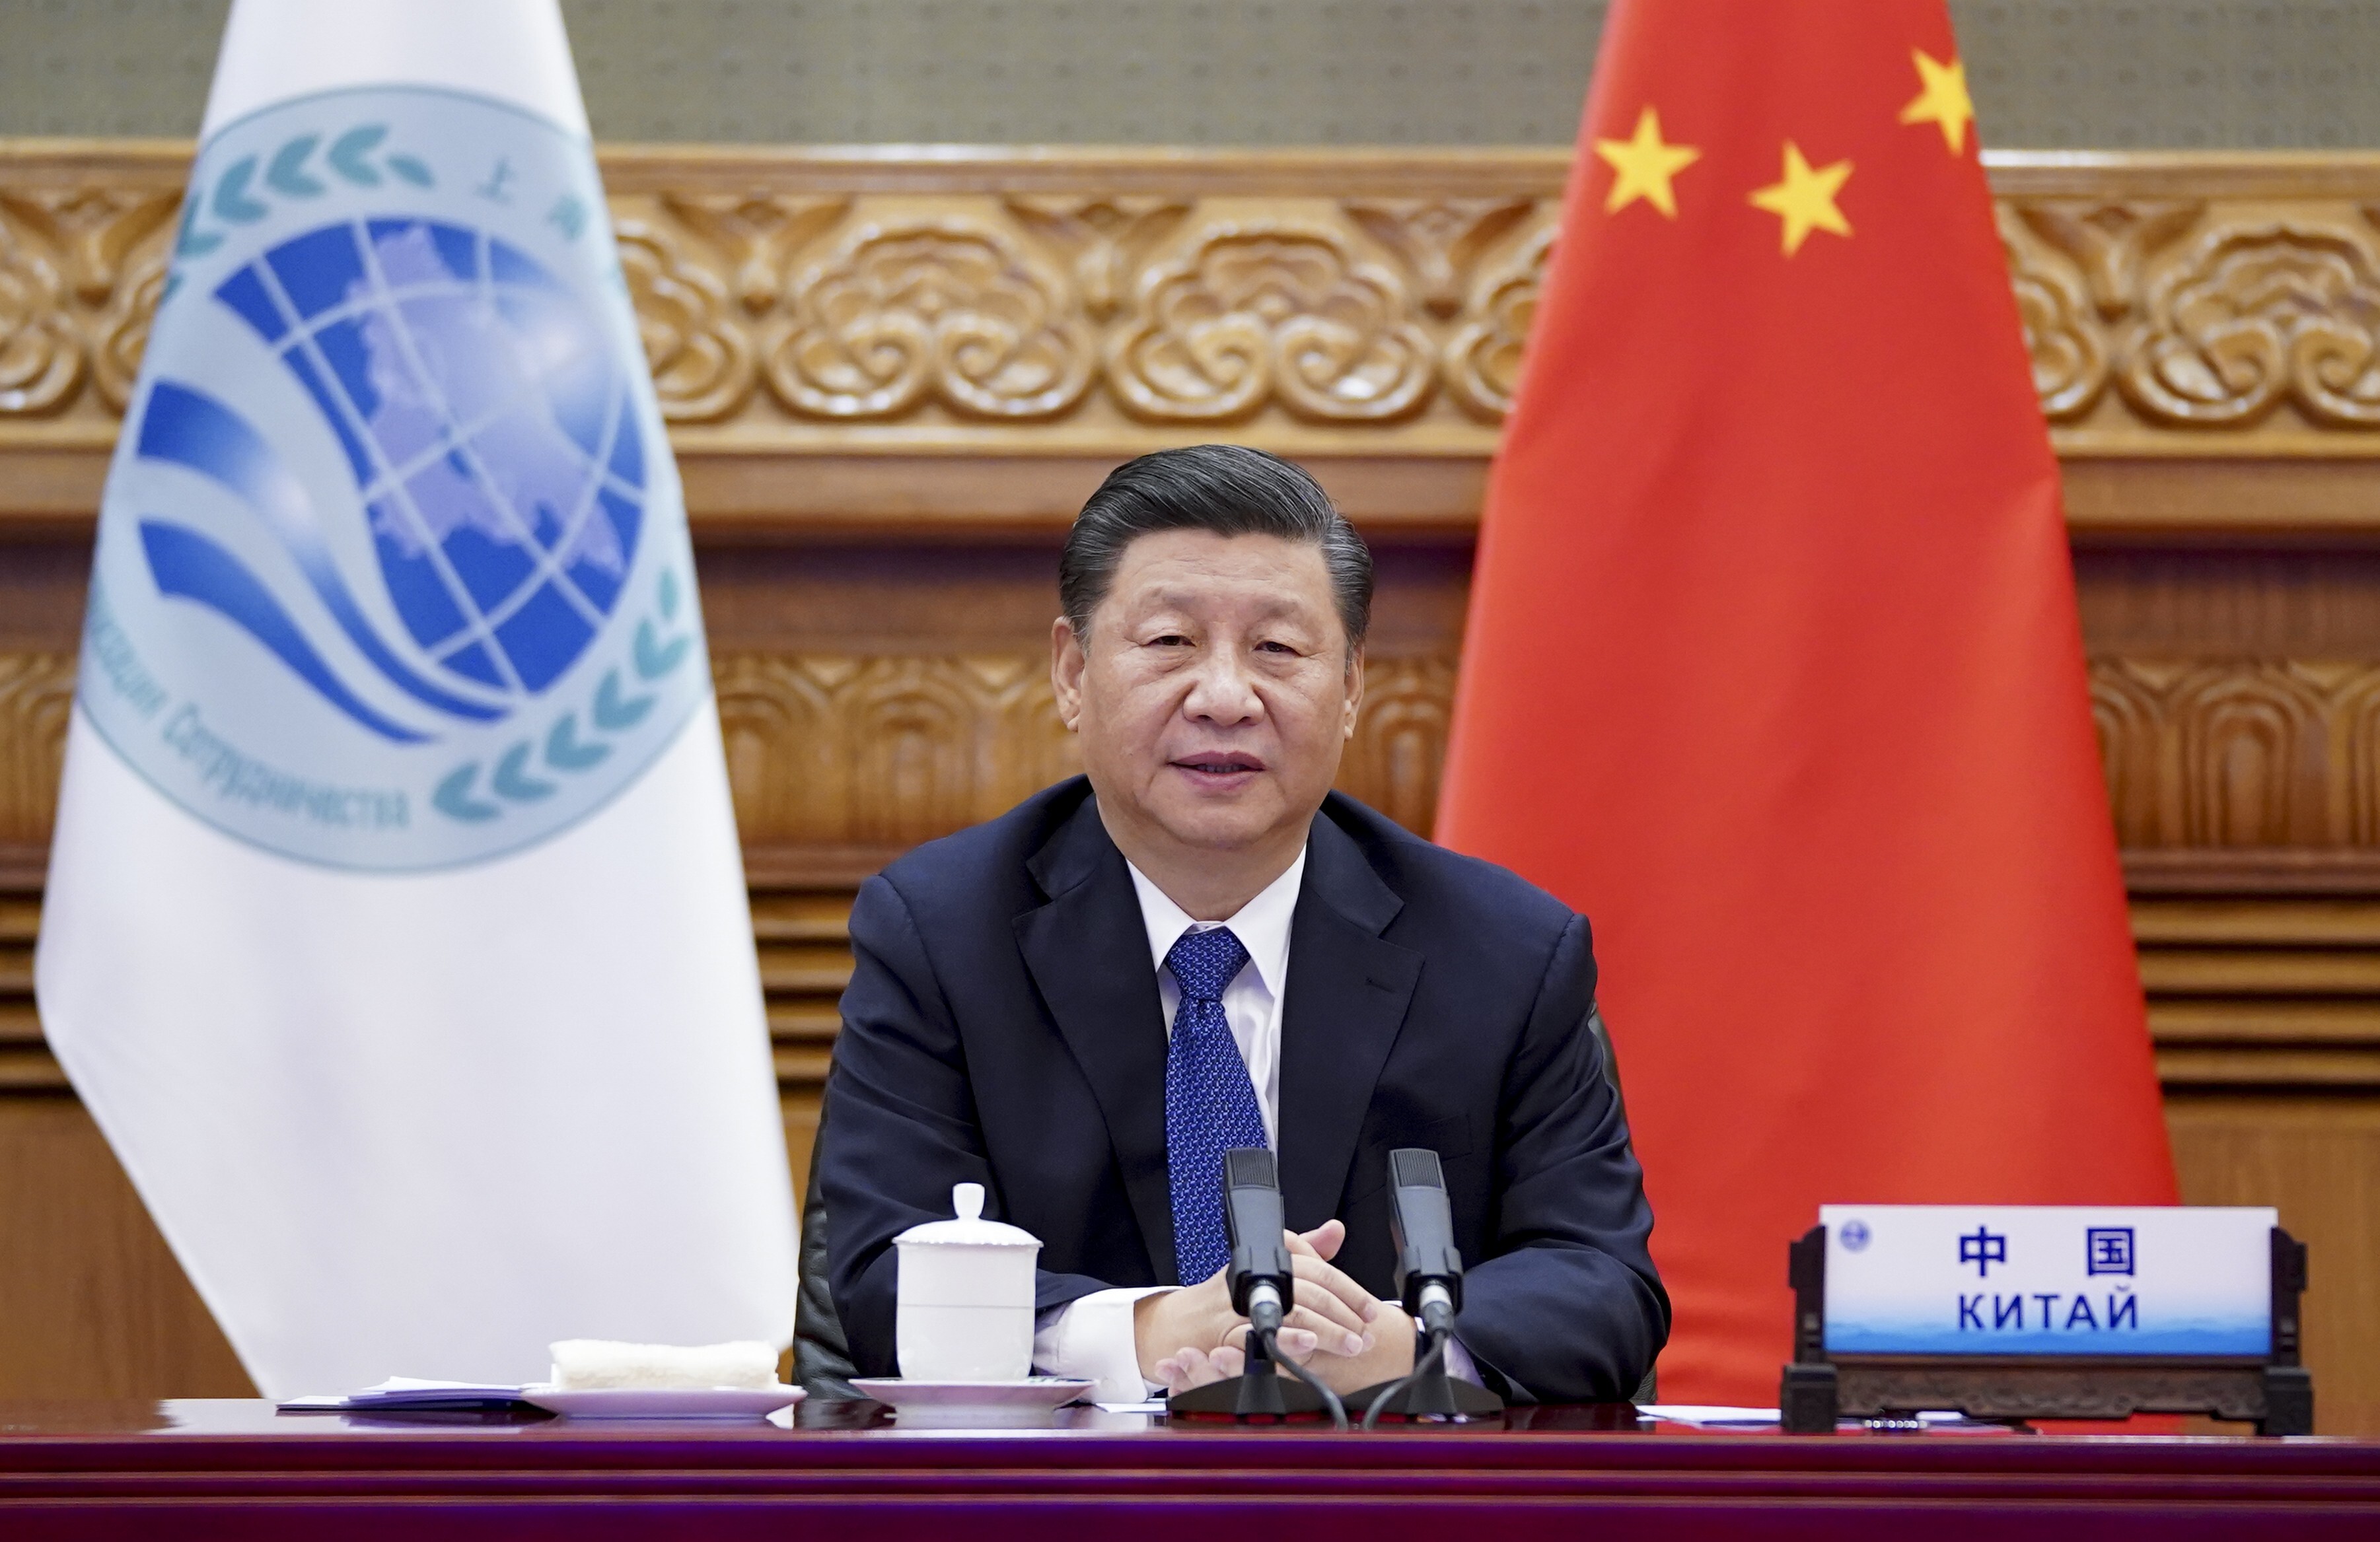 President Xi Jinping addresses the Shanghai Cooperation Organisation summit via video link from Beijing on Tuesday. Photo: Xinhua